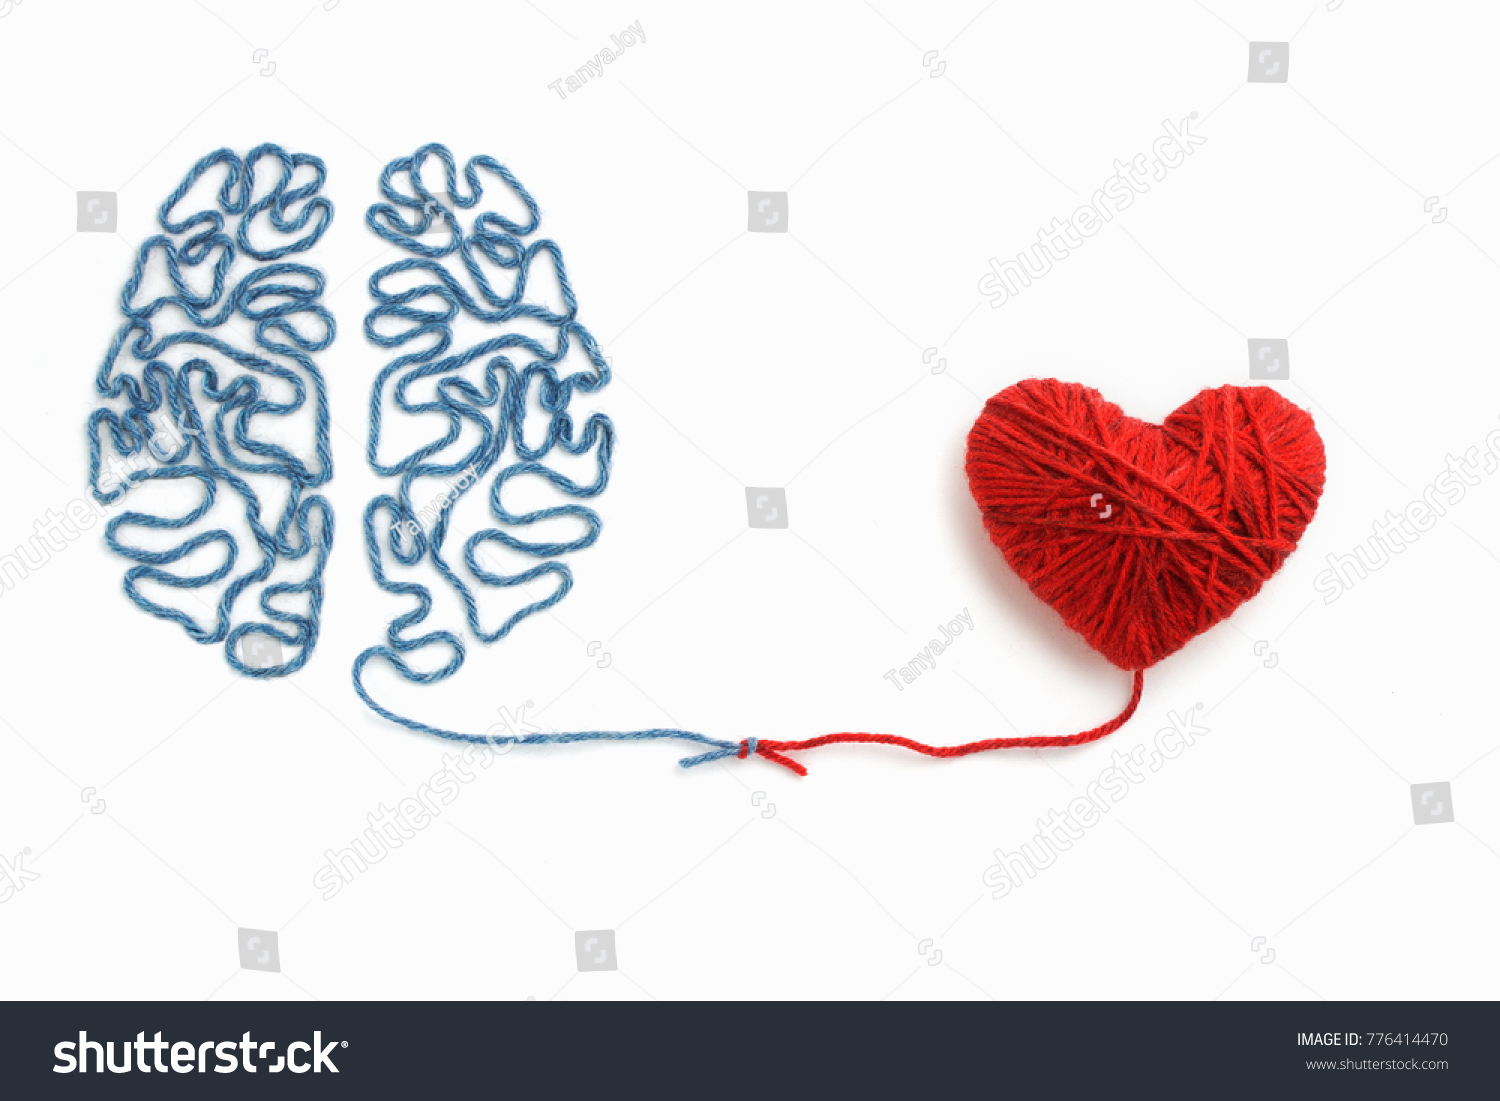 Heart and brain connected by a knot on a white background #776414470